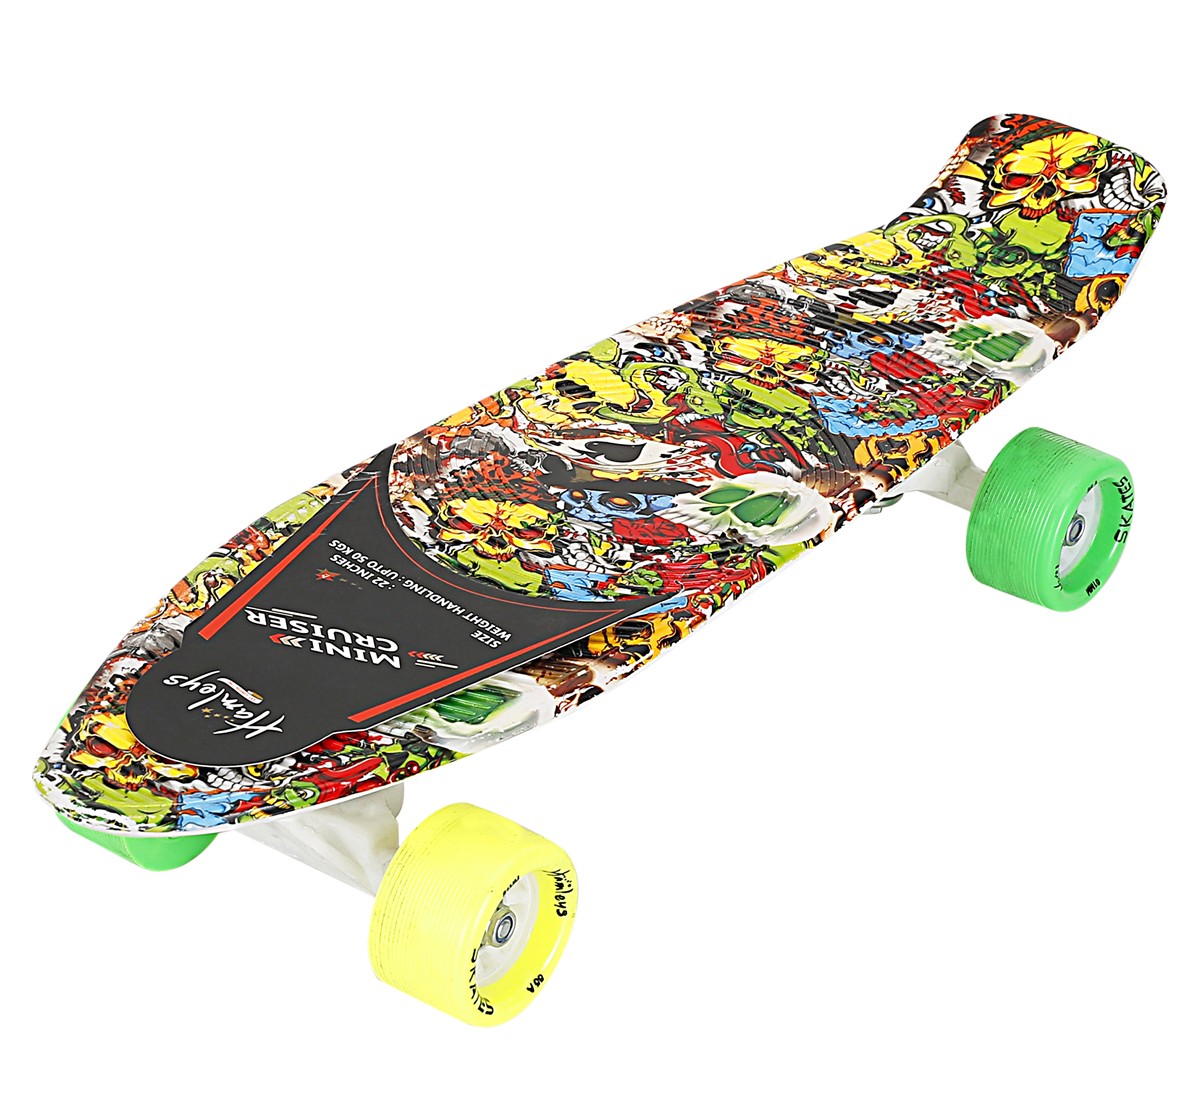 Hamleys Penny Skate Board for kids 7Y+, Yellow and Blue